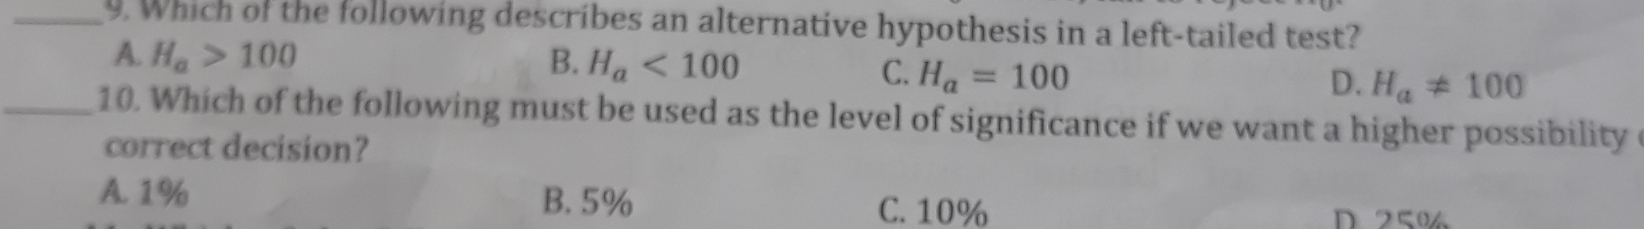 9. Which of the following describes an alternative hypothesis in a left-tailed test? A. H_a>100 B. H_a<100 C. H_a=100 D. H_aneq 100 10. Which of the following must be used as the level of significance if we want a higher possibility correct decision? A.1% B.5% C. 10% D2K0